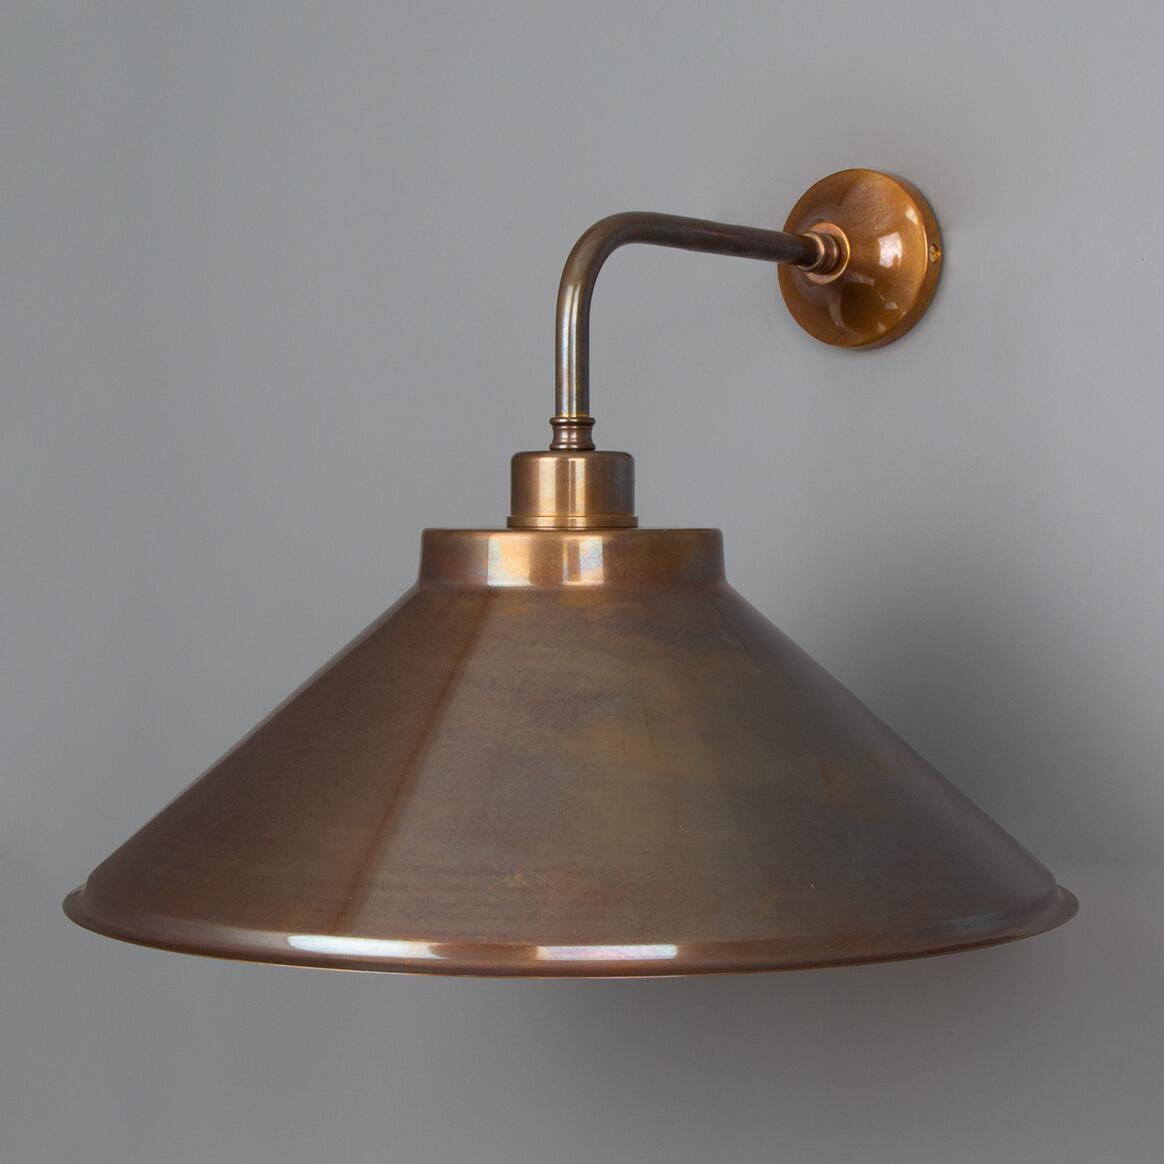 Rio Vintage Wall Light with Brass Cone Shade 15" main product image